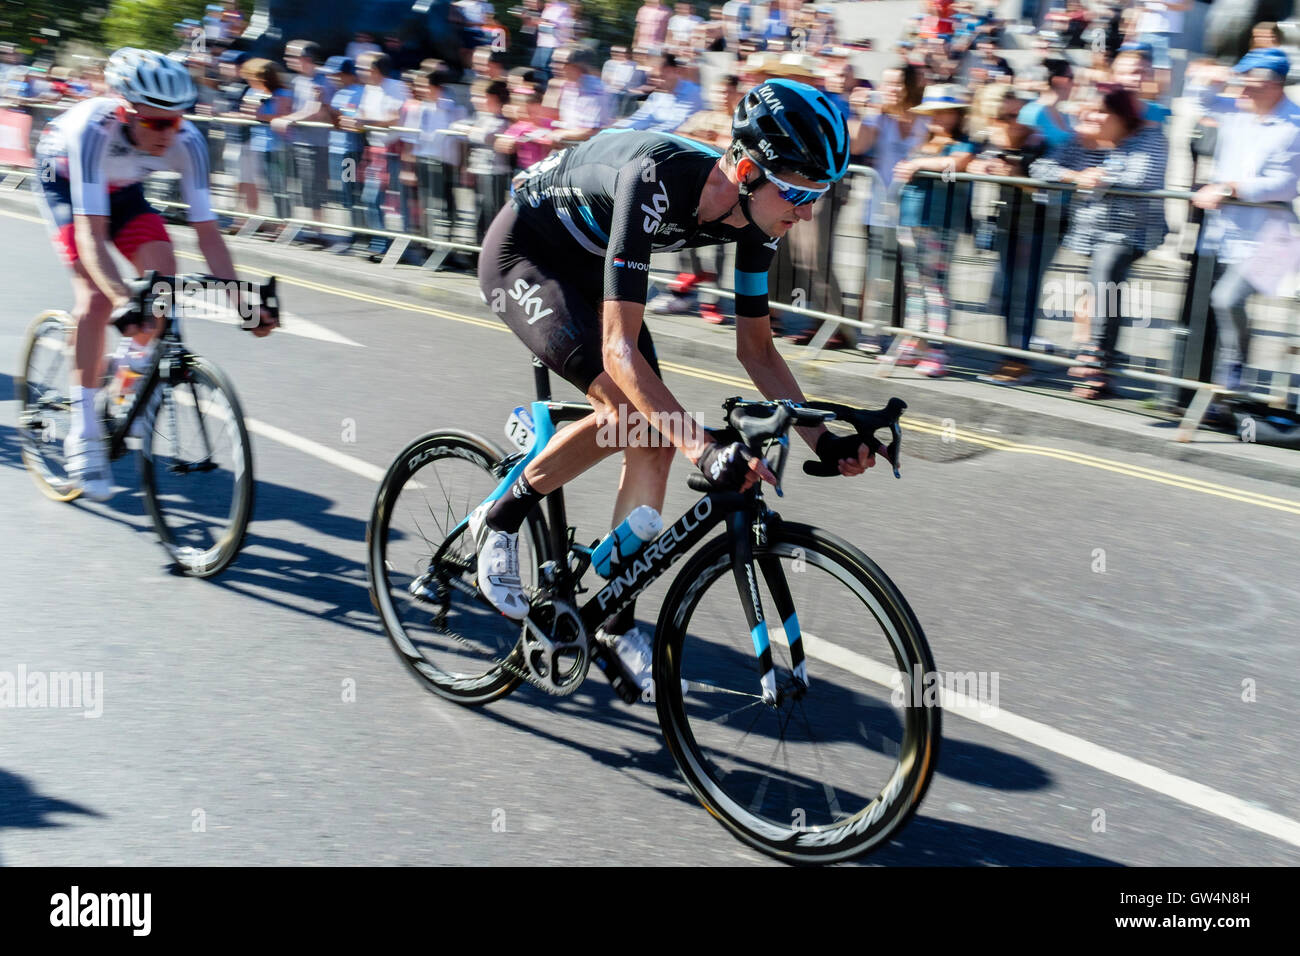 Team Sky rider Wout Poels competing in the 2016. Tour of Britain cycle race final stage, London, UK. Stock Photo